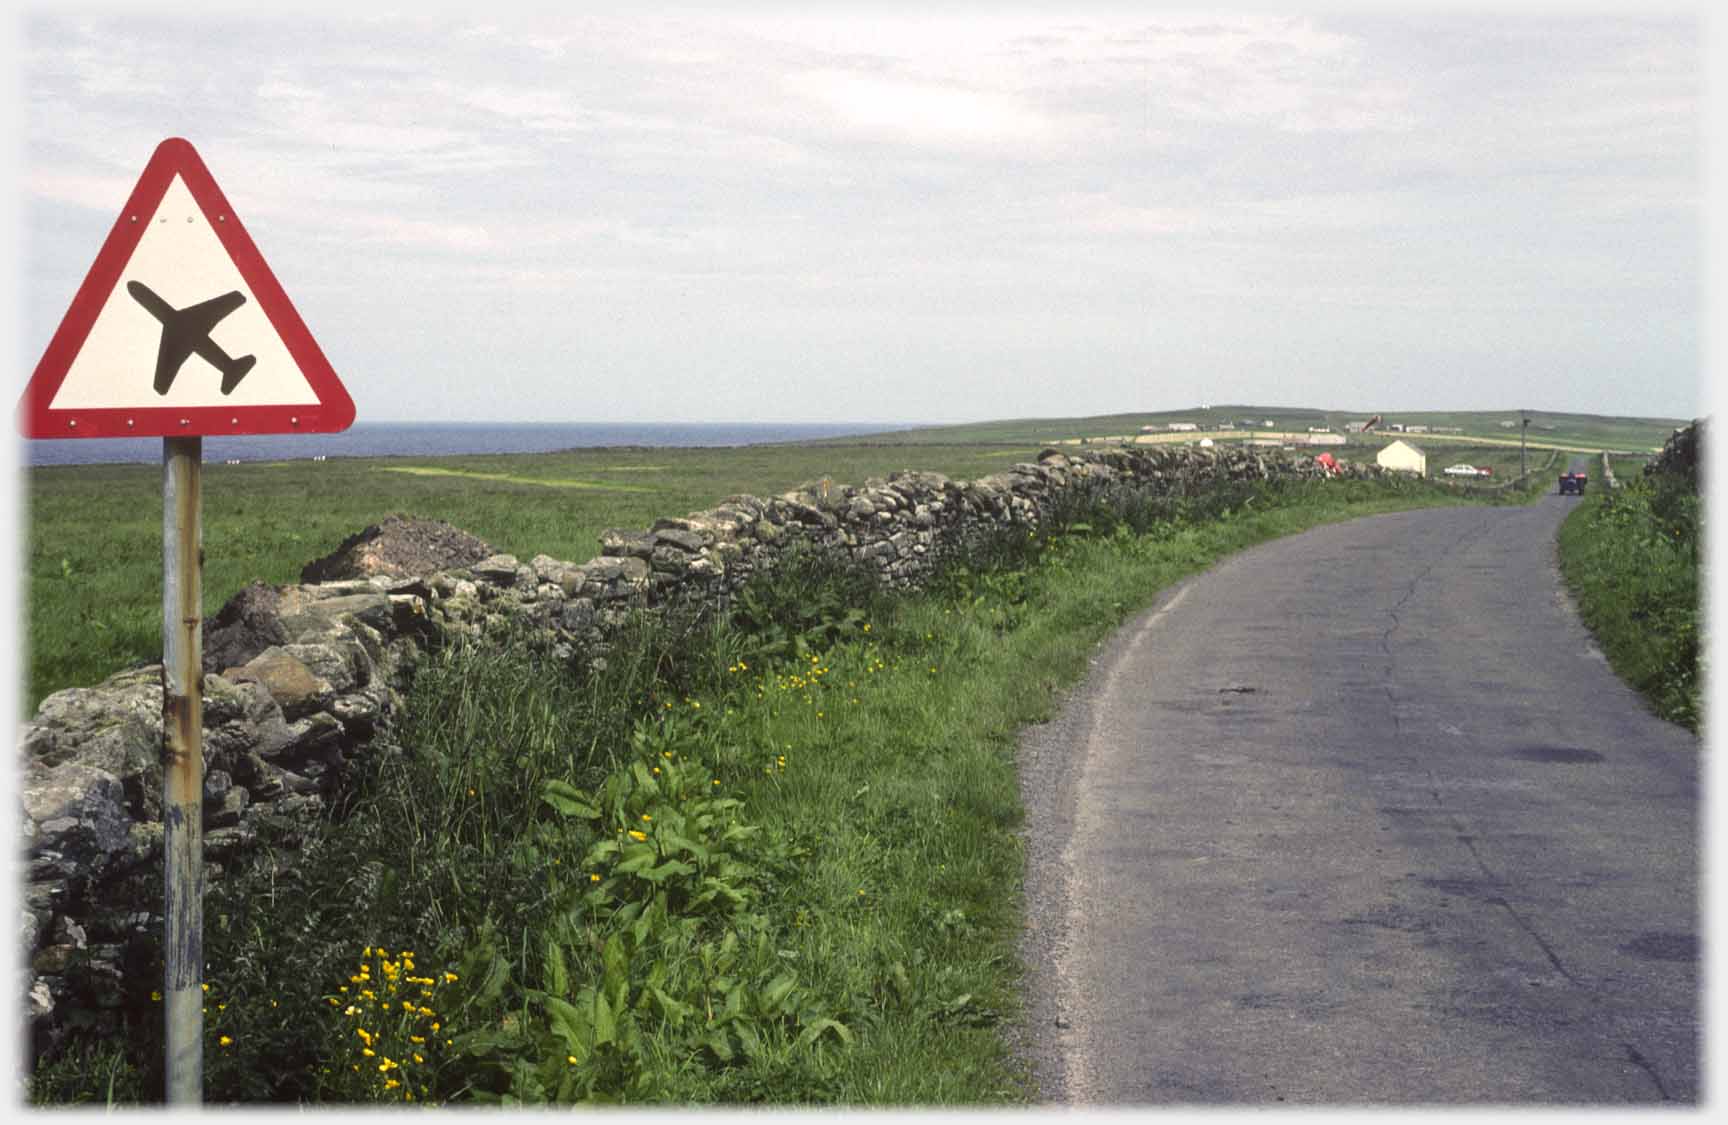 Road with tringular road warning sign of plane.